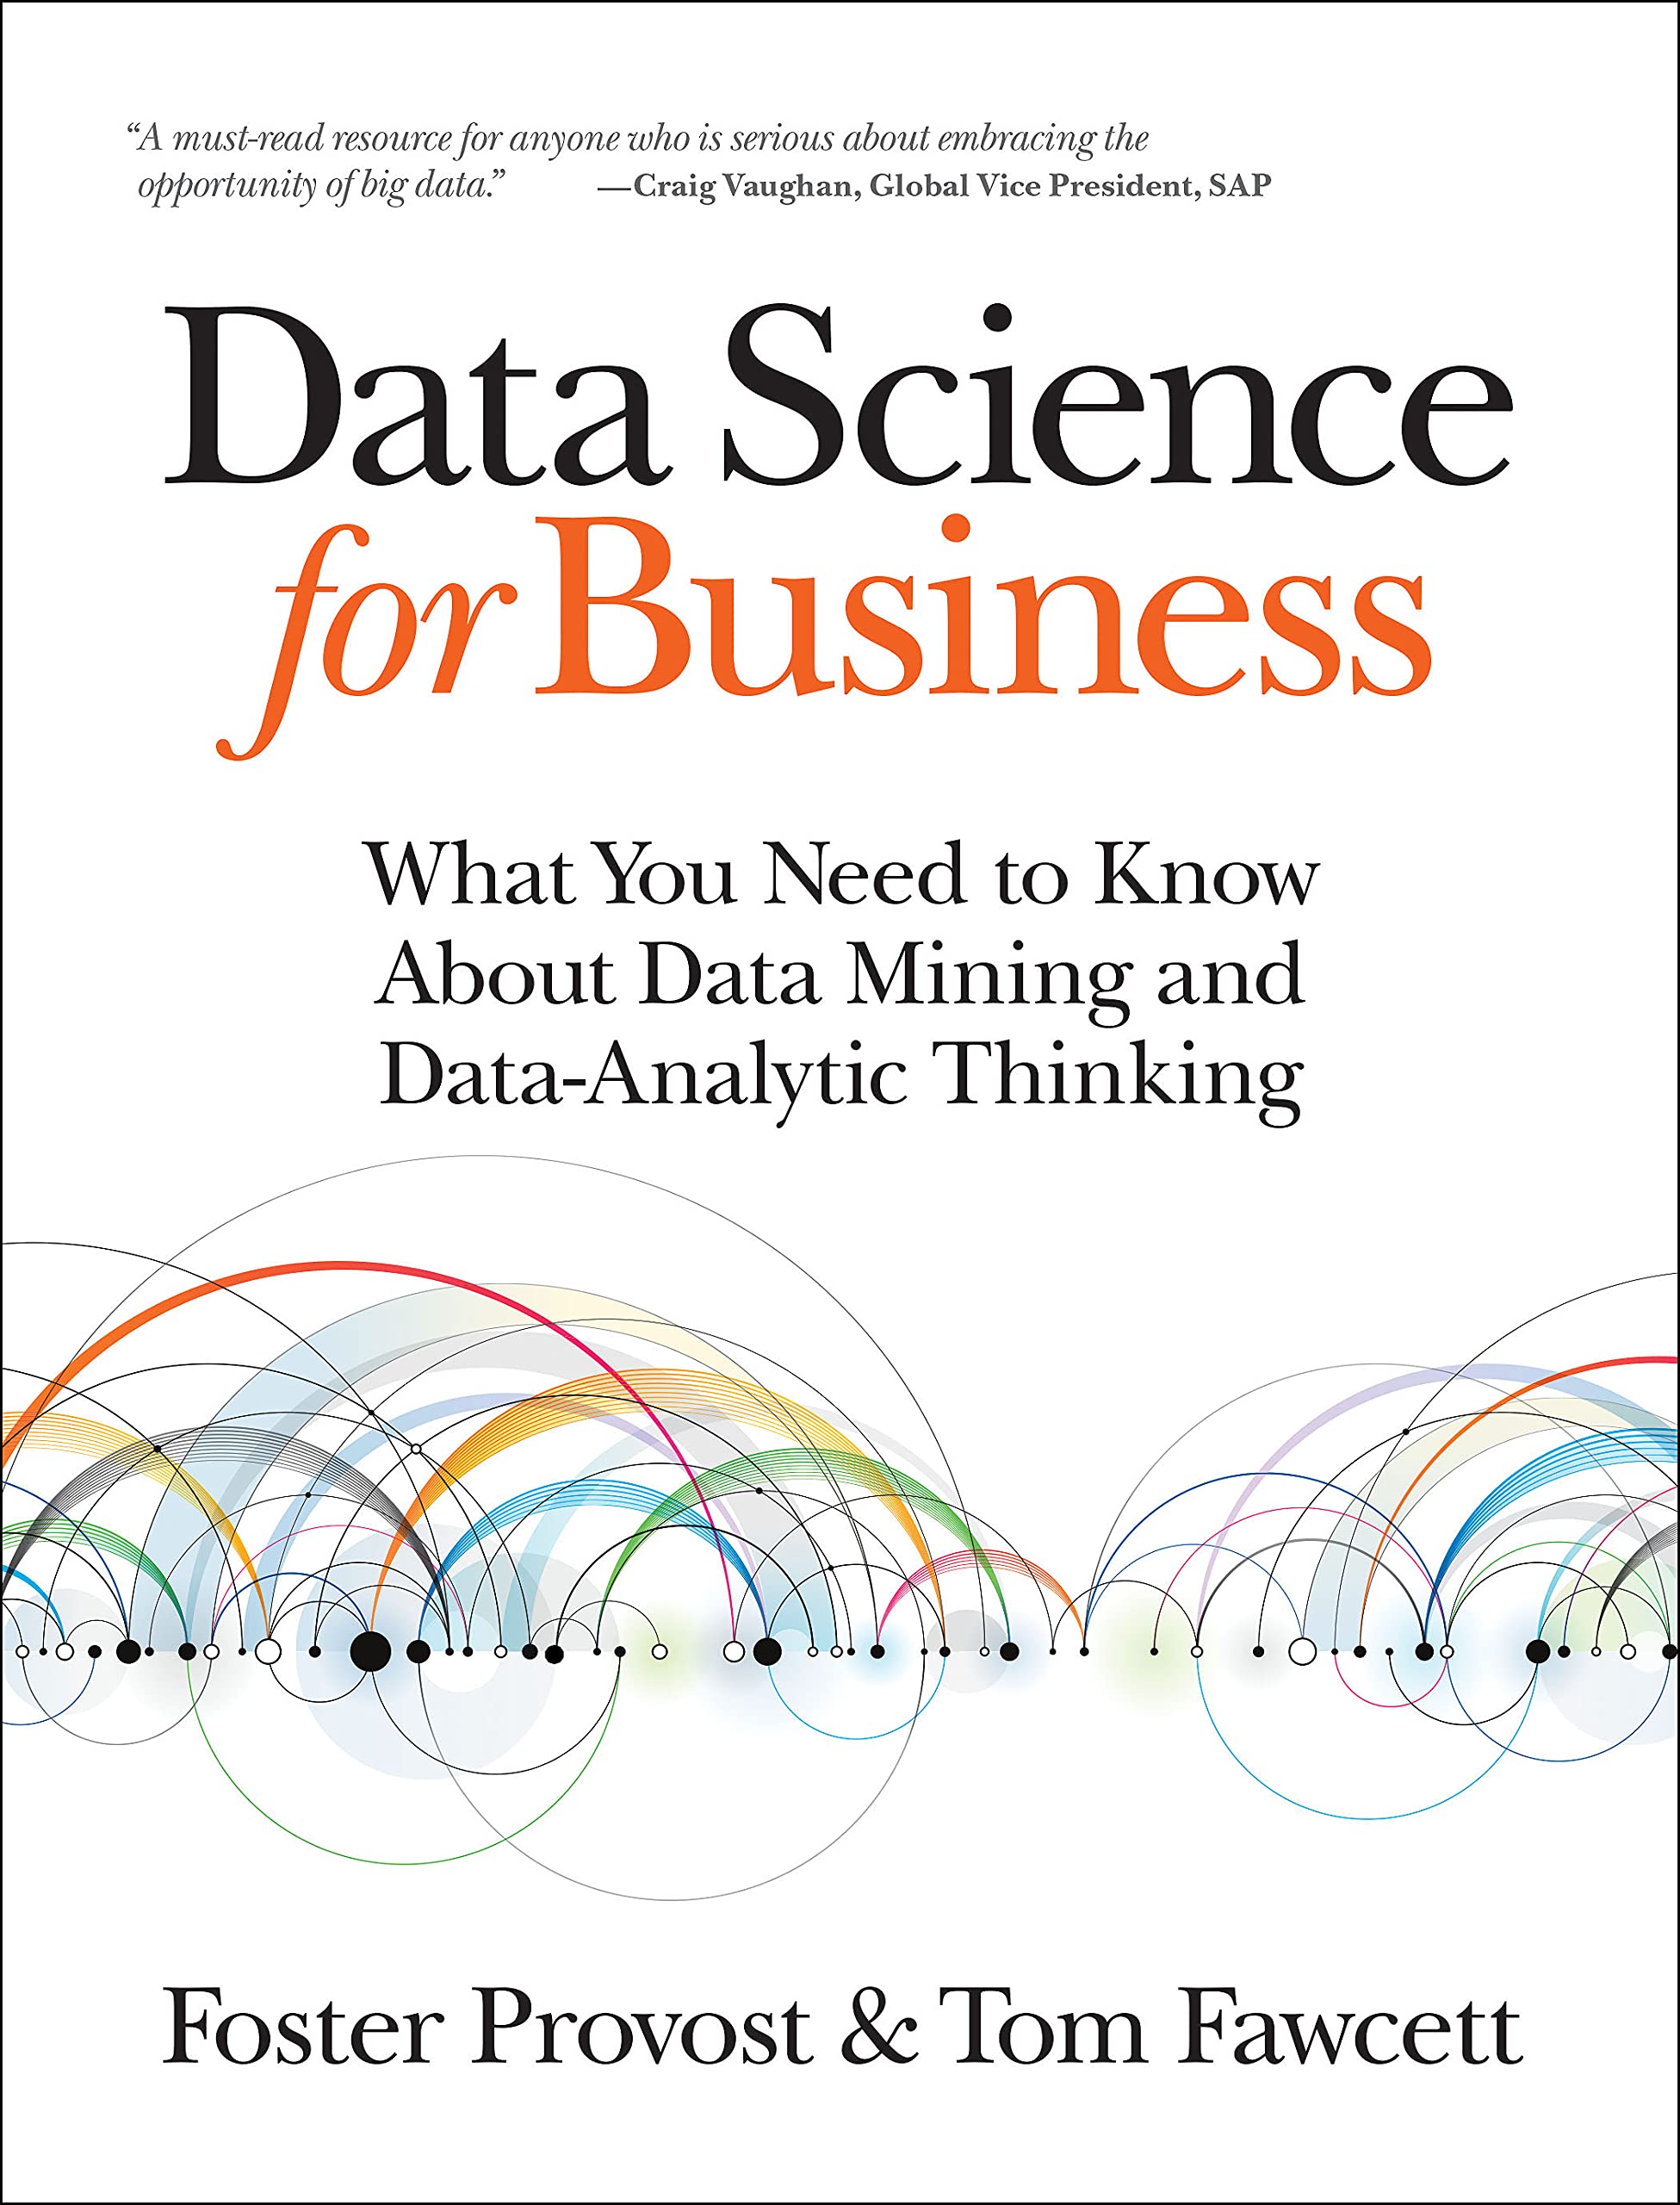 Data Science for Business.